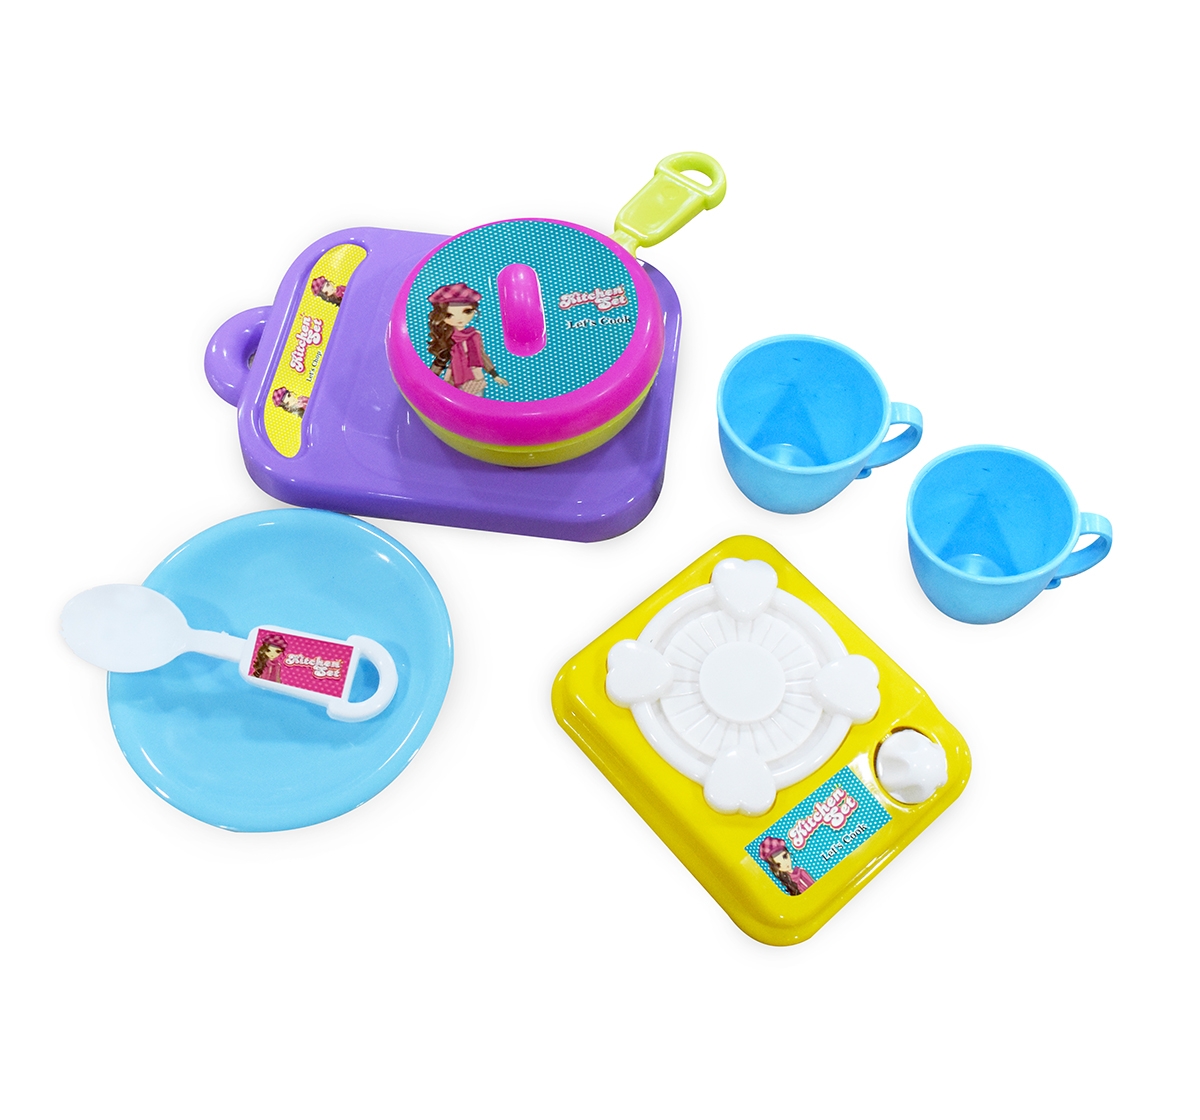 Itoys | I Toys Kitchen set role play toys for kids, 3Y+